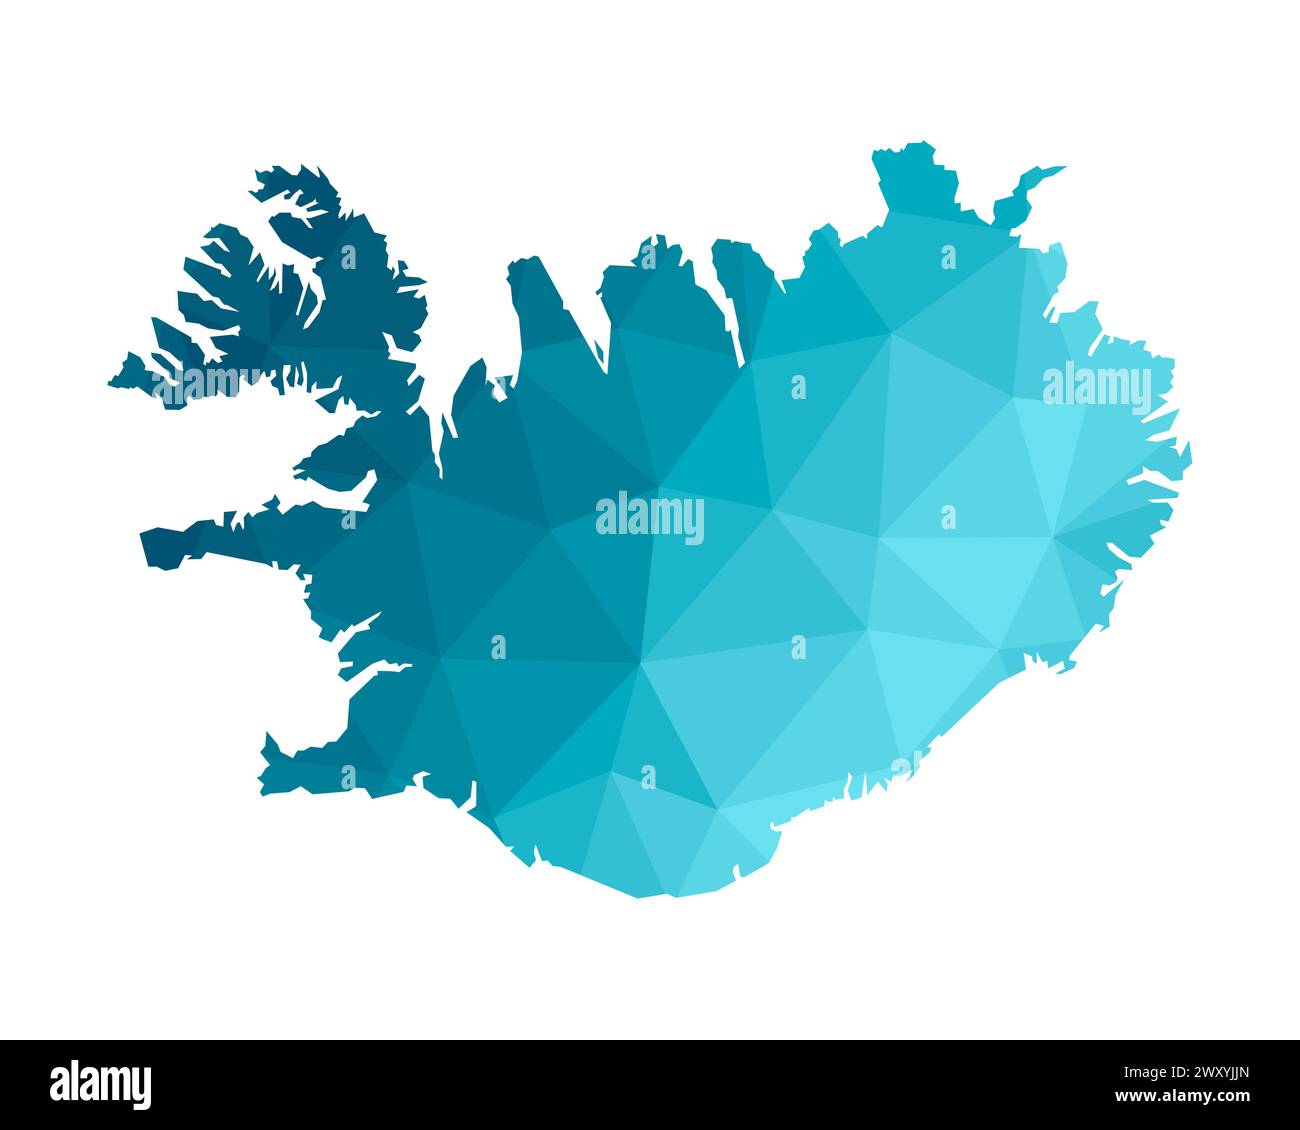 Vector isolated illustration icon with simplified blue silhouette of Iceland map. Polygonal geometric style, triangular shapes. White background. Stock Vector